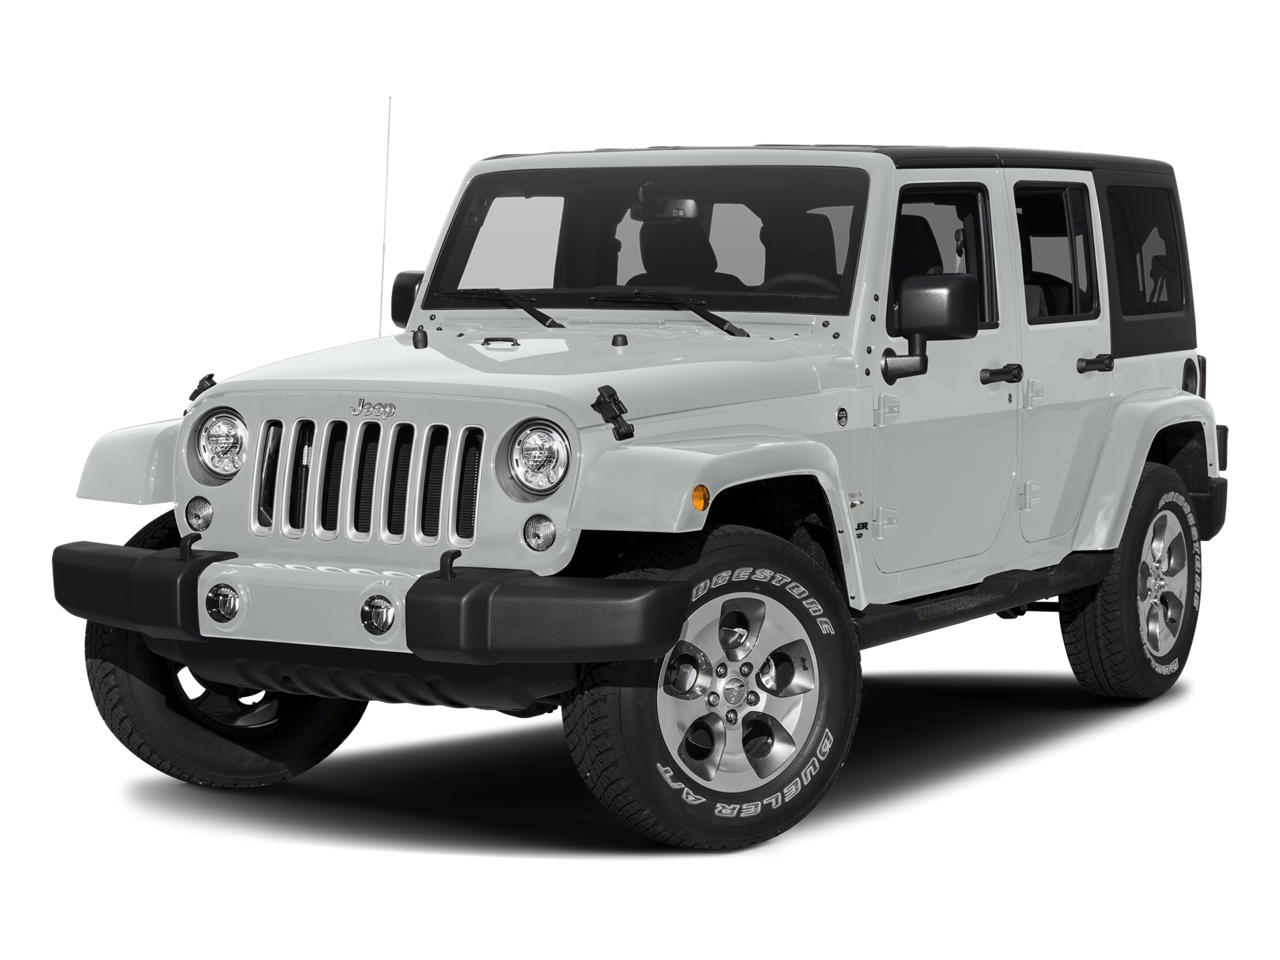 Used 2017 Jeep Wrangler Unlimited Sahara in St Louis, MO - Dave Sinclair  Lincoln